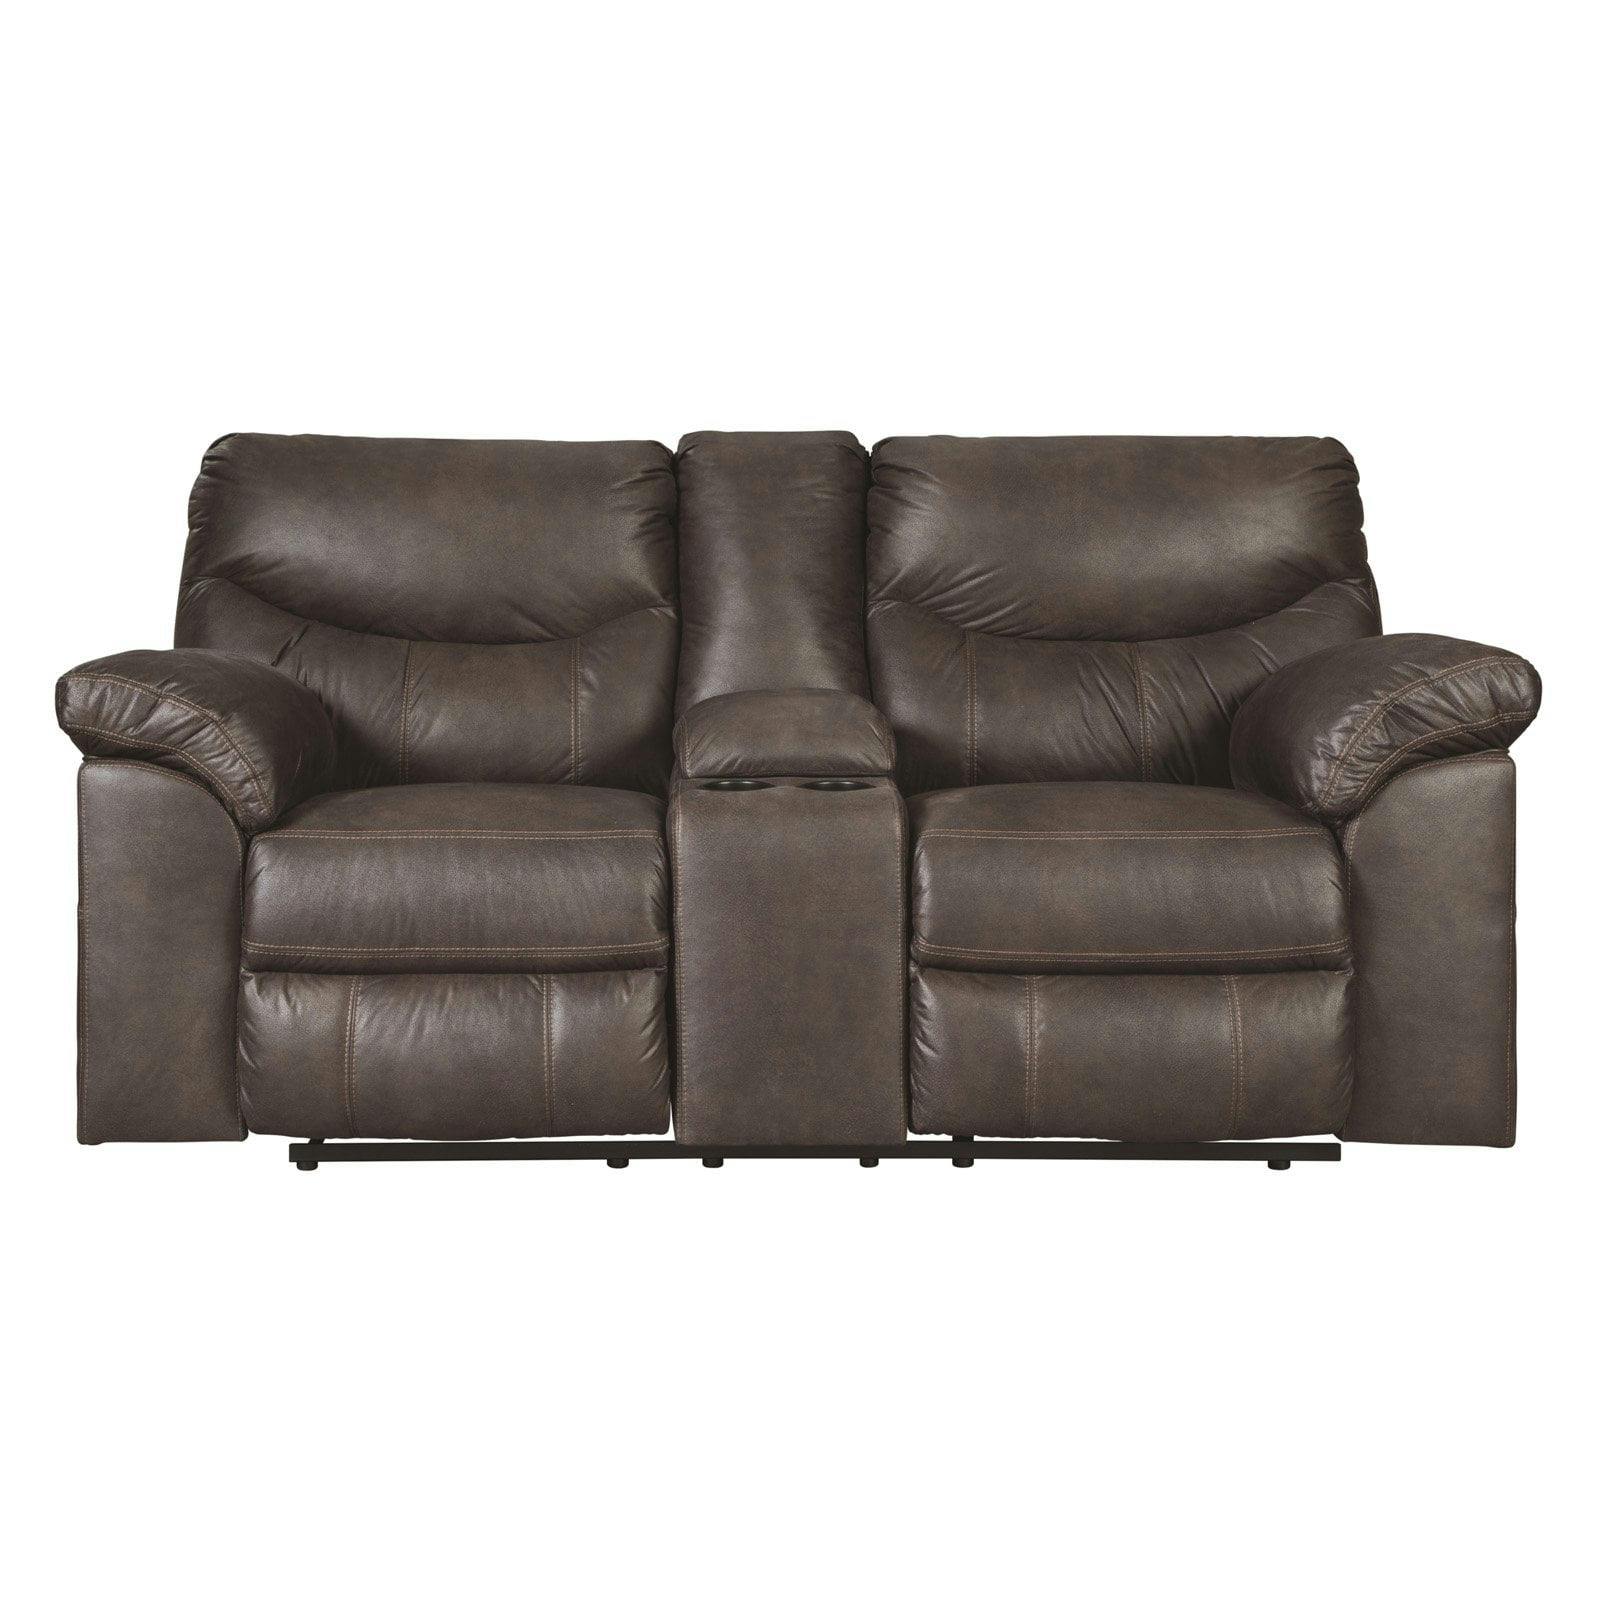 Teak Brown Faux Leather Reclining Loveseat with Cup Holder